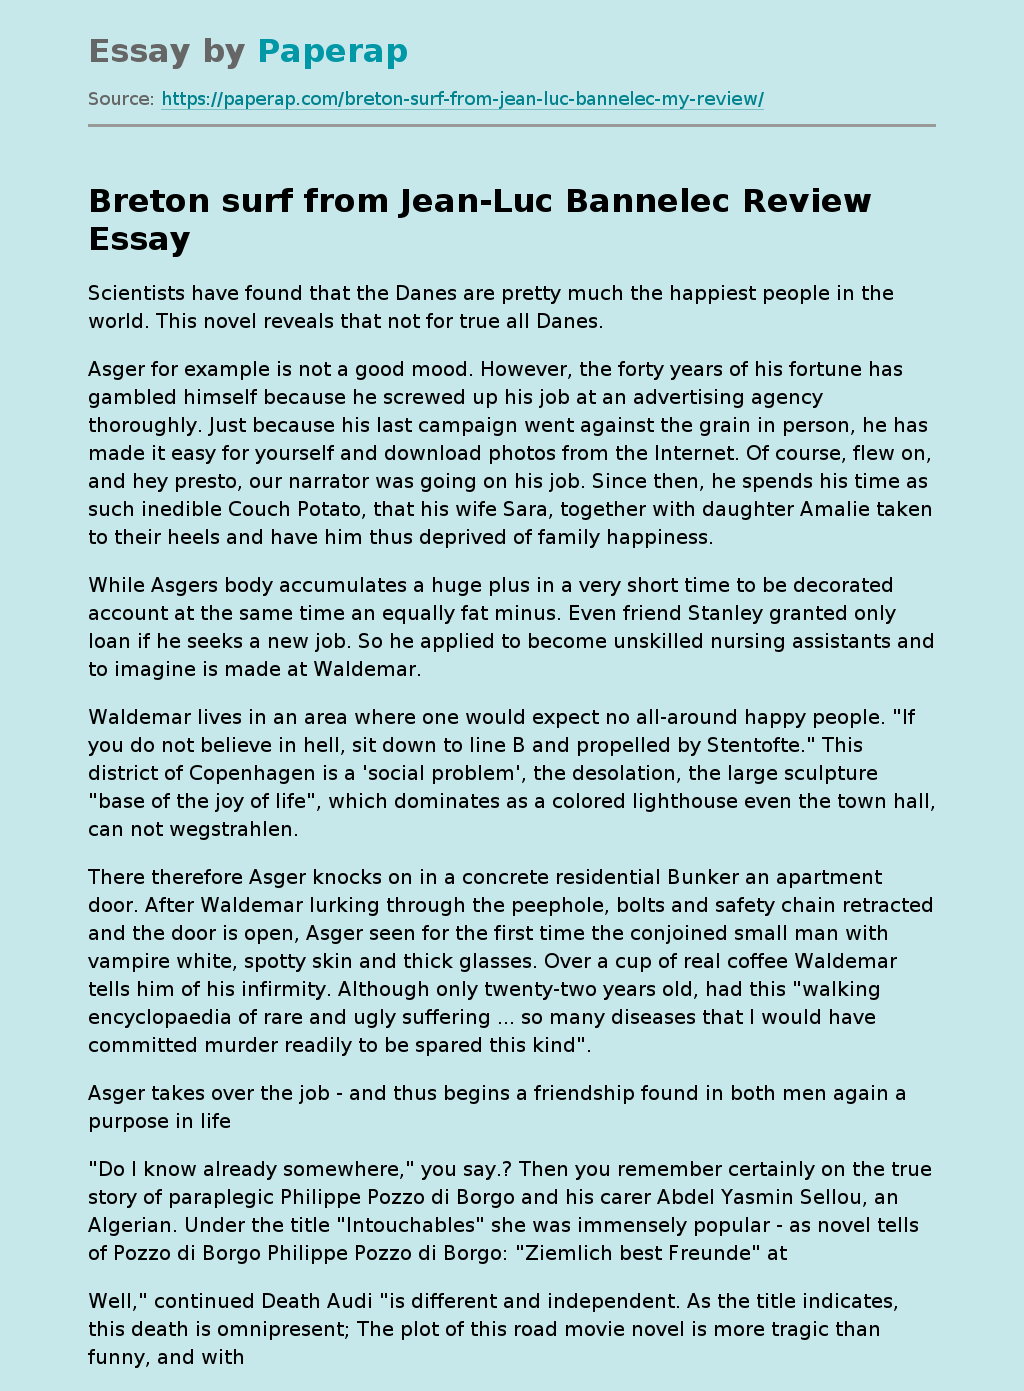 Breton Surf From Jean-luc Bannelec Review